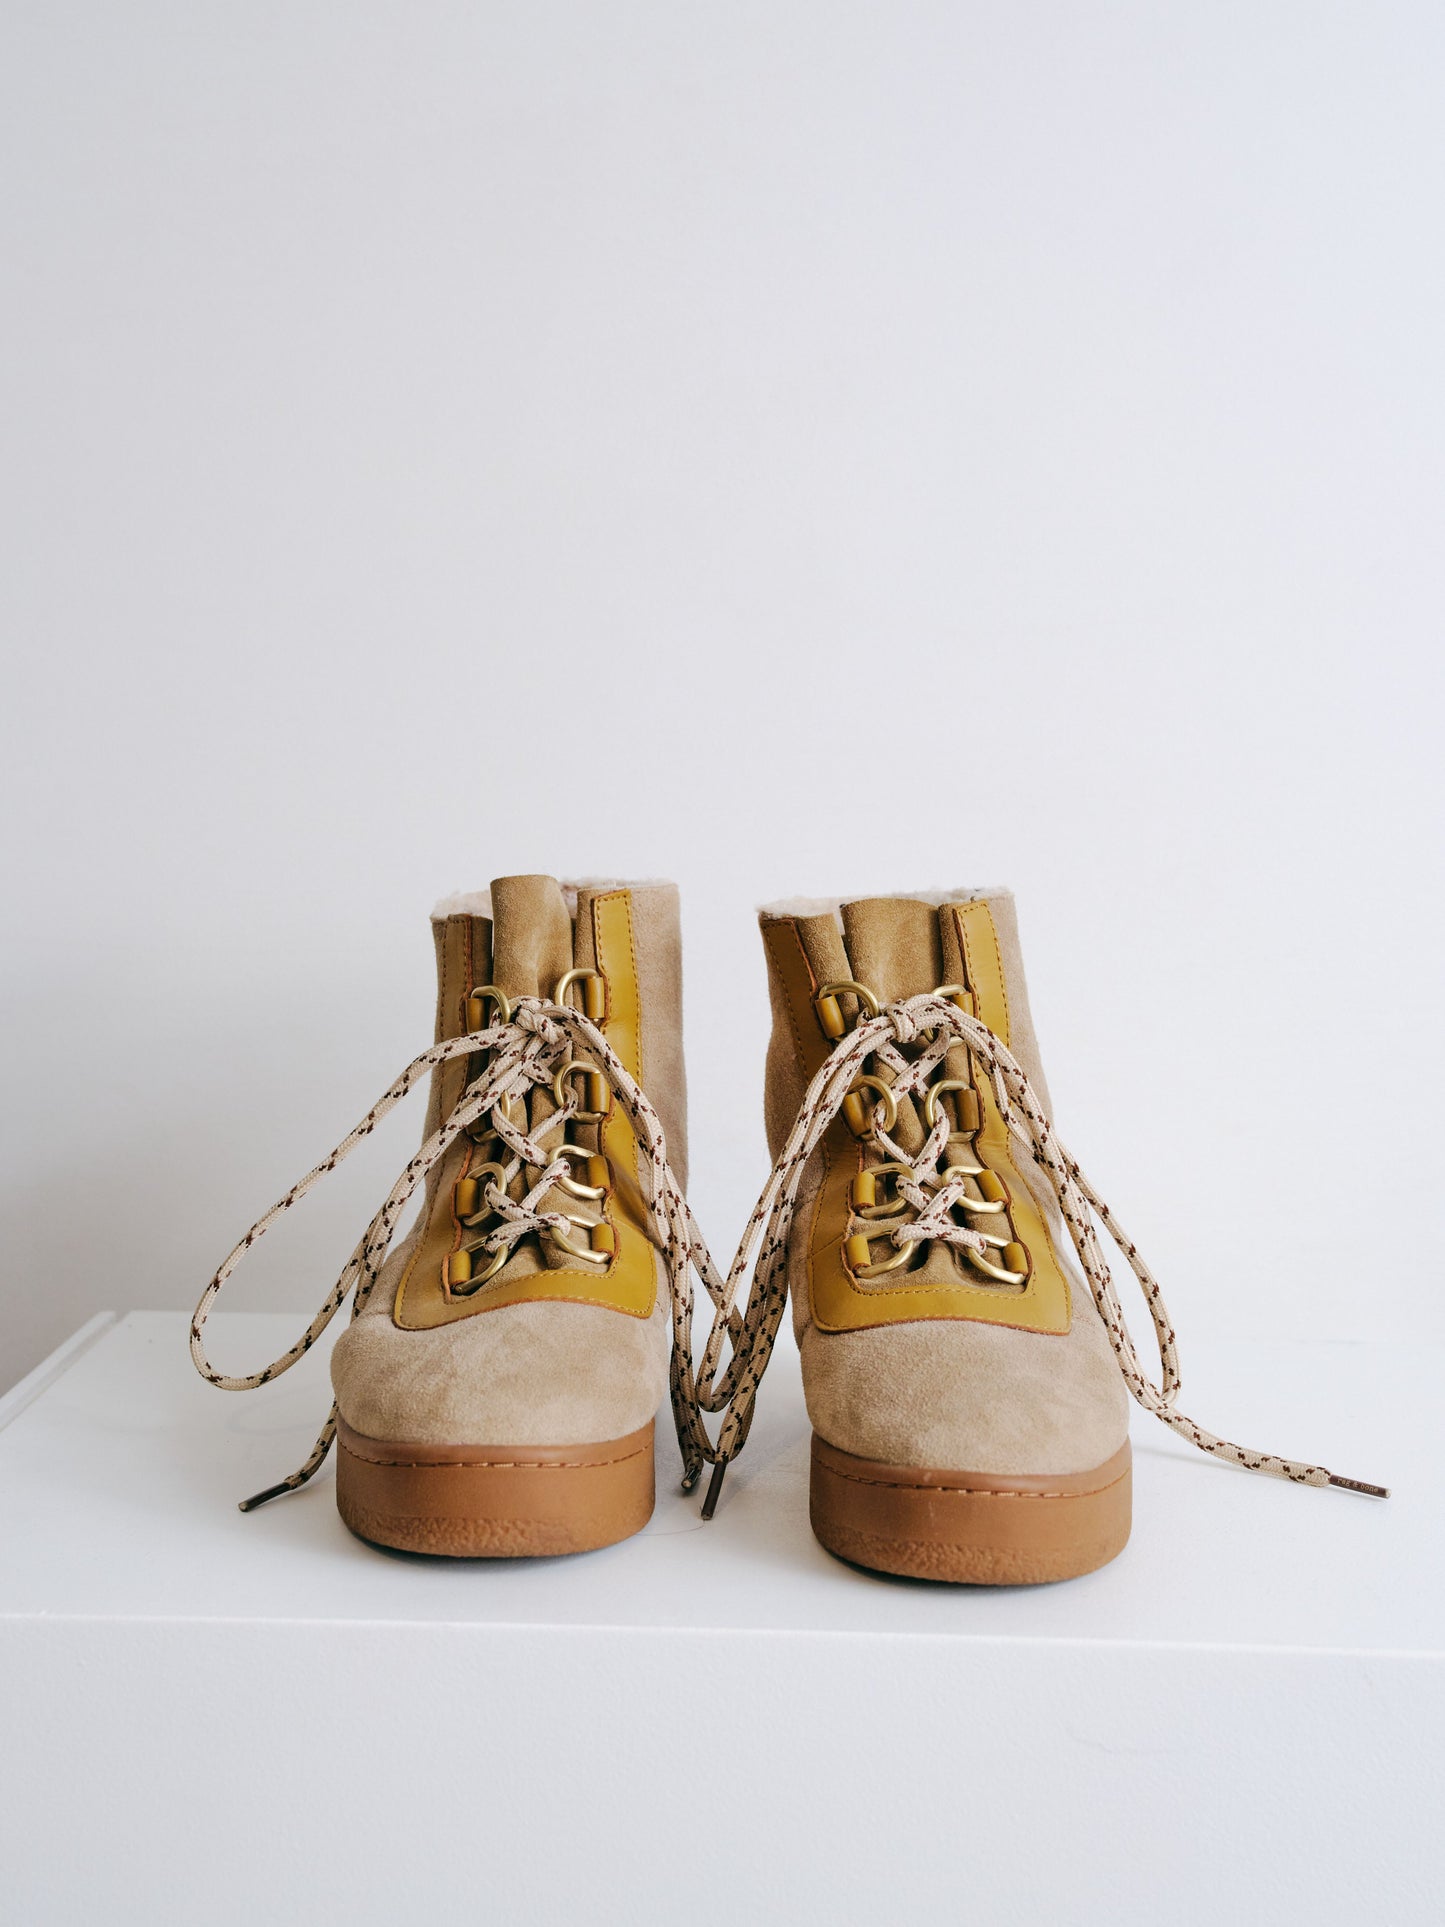 Taupe/Camel Lamb & Cow Leather Boots